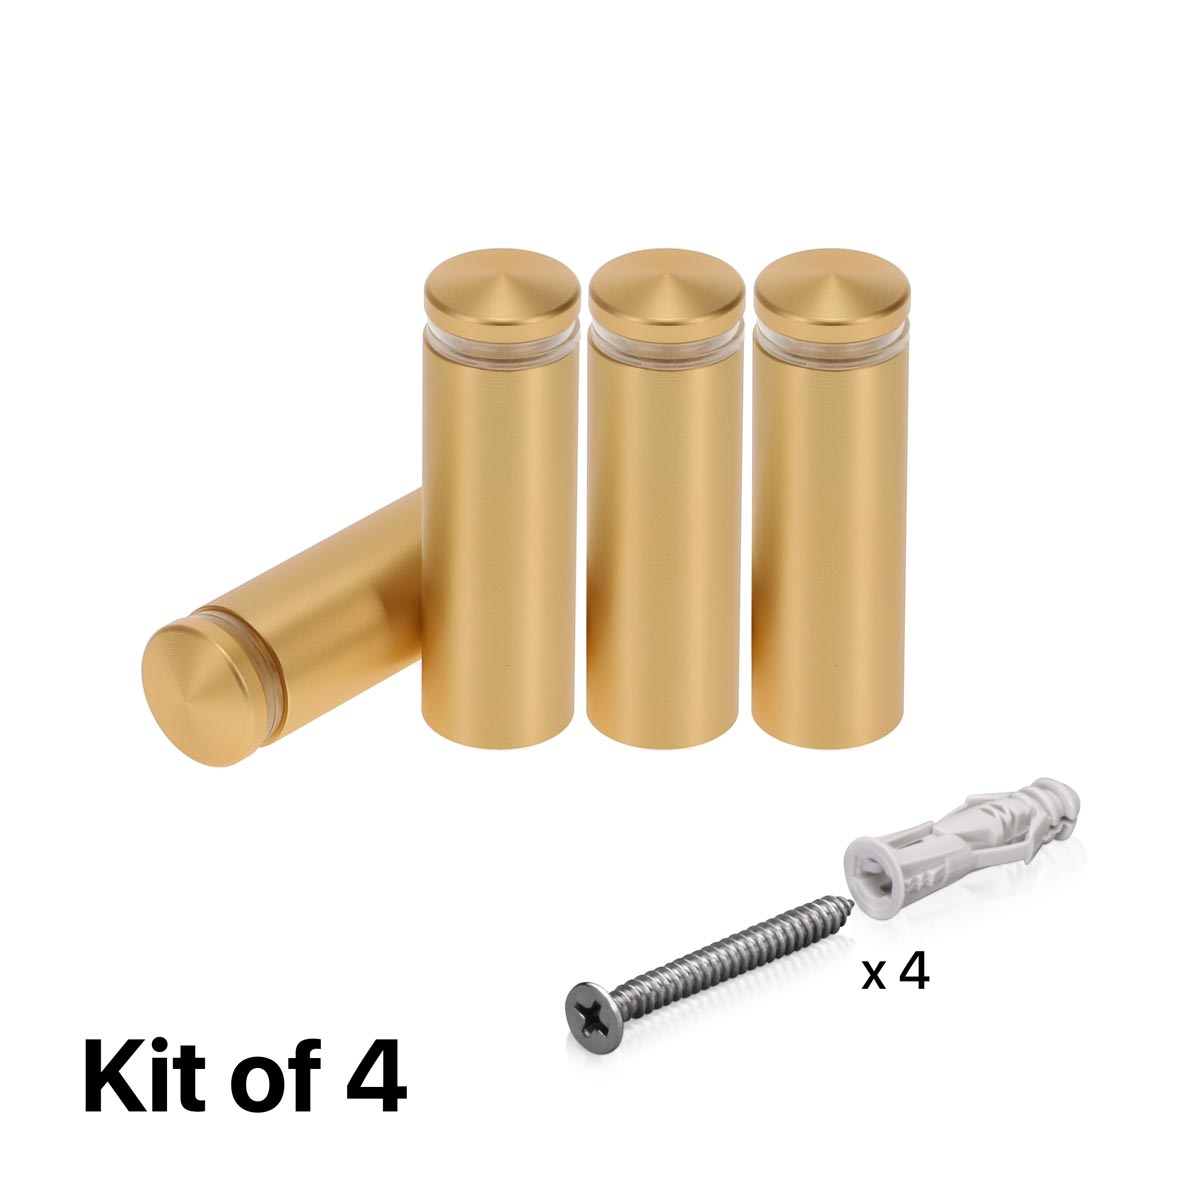 (Set of 4) 5/8'' Diameter X 1-3/4'' Barrel Length, Alumi. Rounded Head Standoffs, Matte Champagne Anodized Finish Standoff with (4) 2208Z Screw and (4) LANC1 Anchor for concrete or drywall (For In / Out use) [Required Material Hole Size: 7/16'']